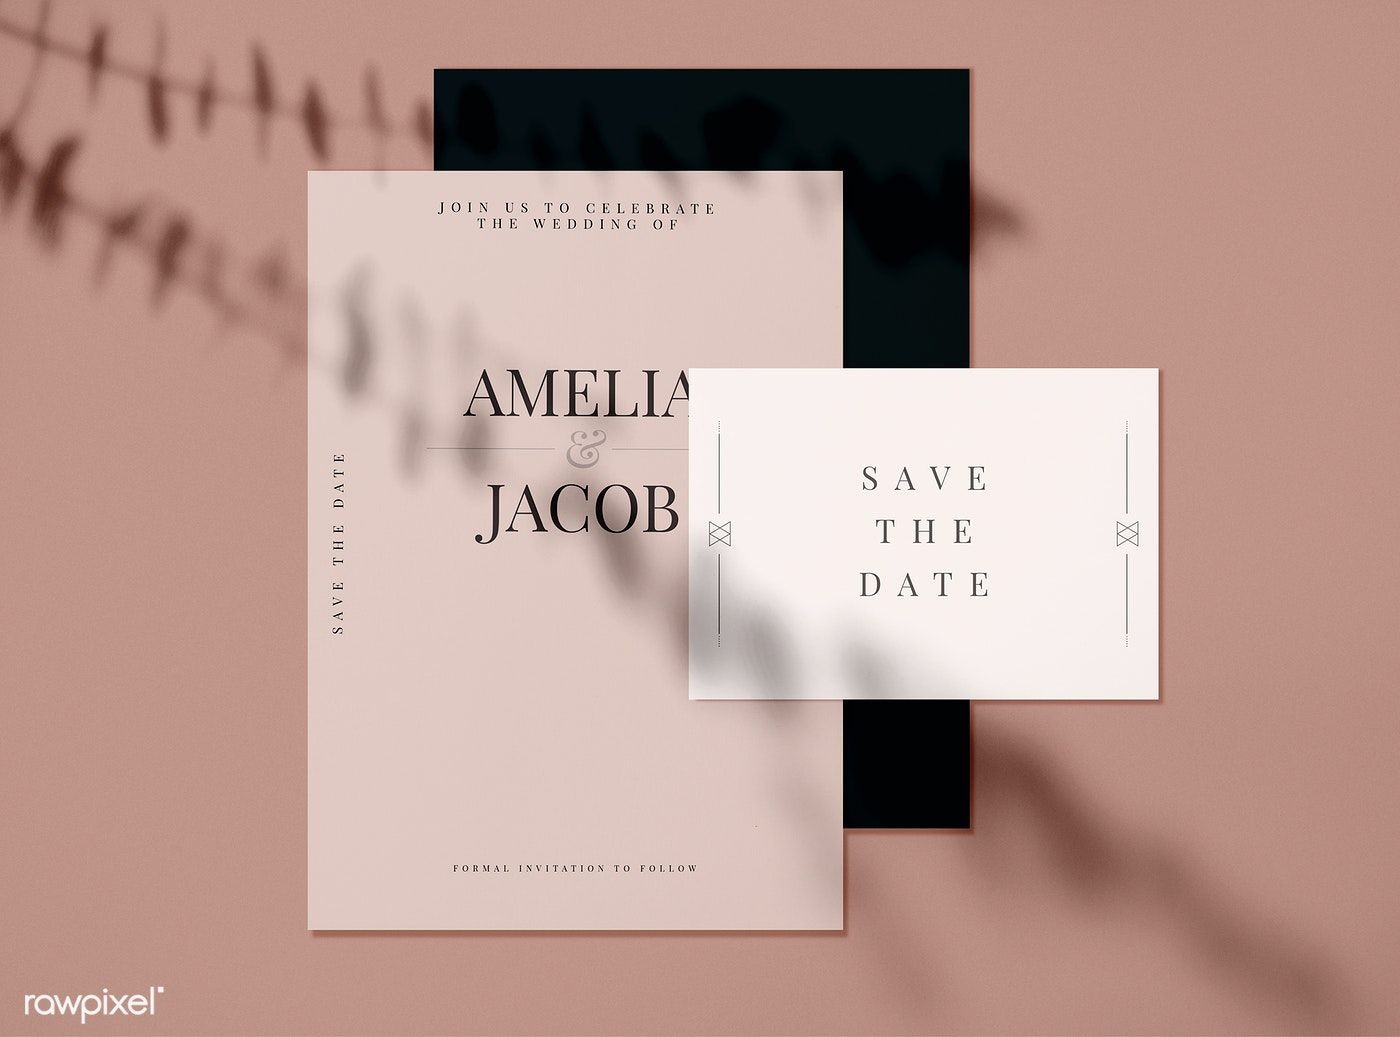 Save The Date Wedding Invitation Card Mockups | Free Image In Save The Date Powerpoint Template